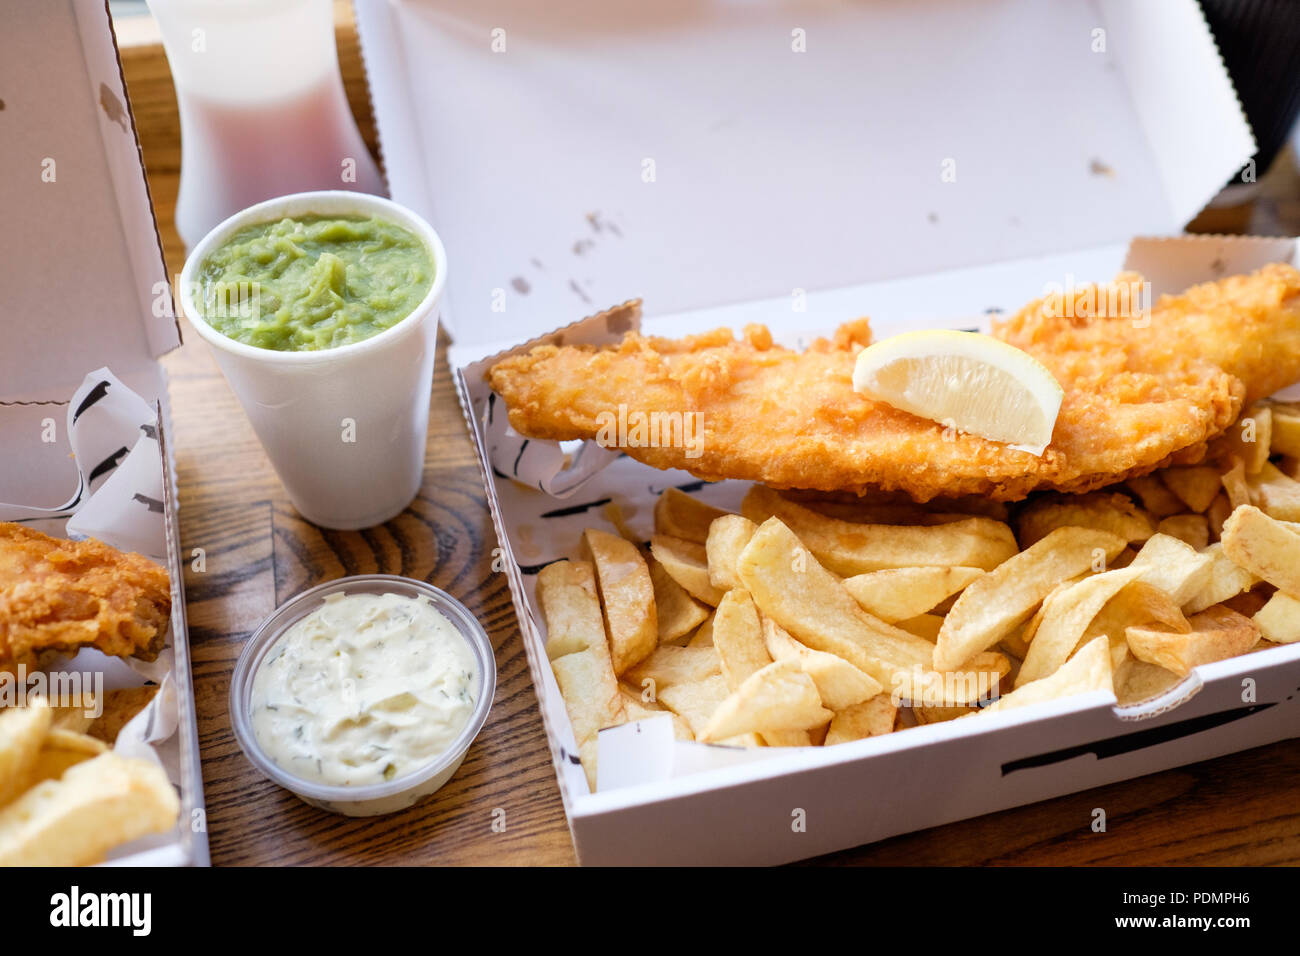 Fish and Chips takeaway with mushy peas and tartar sauce from Longsands Fish Kitchen in Tynemouth Village, Tyne & Wear, England. Stock Photo